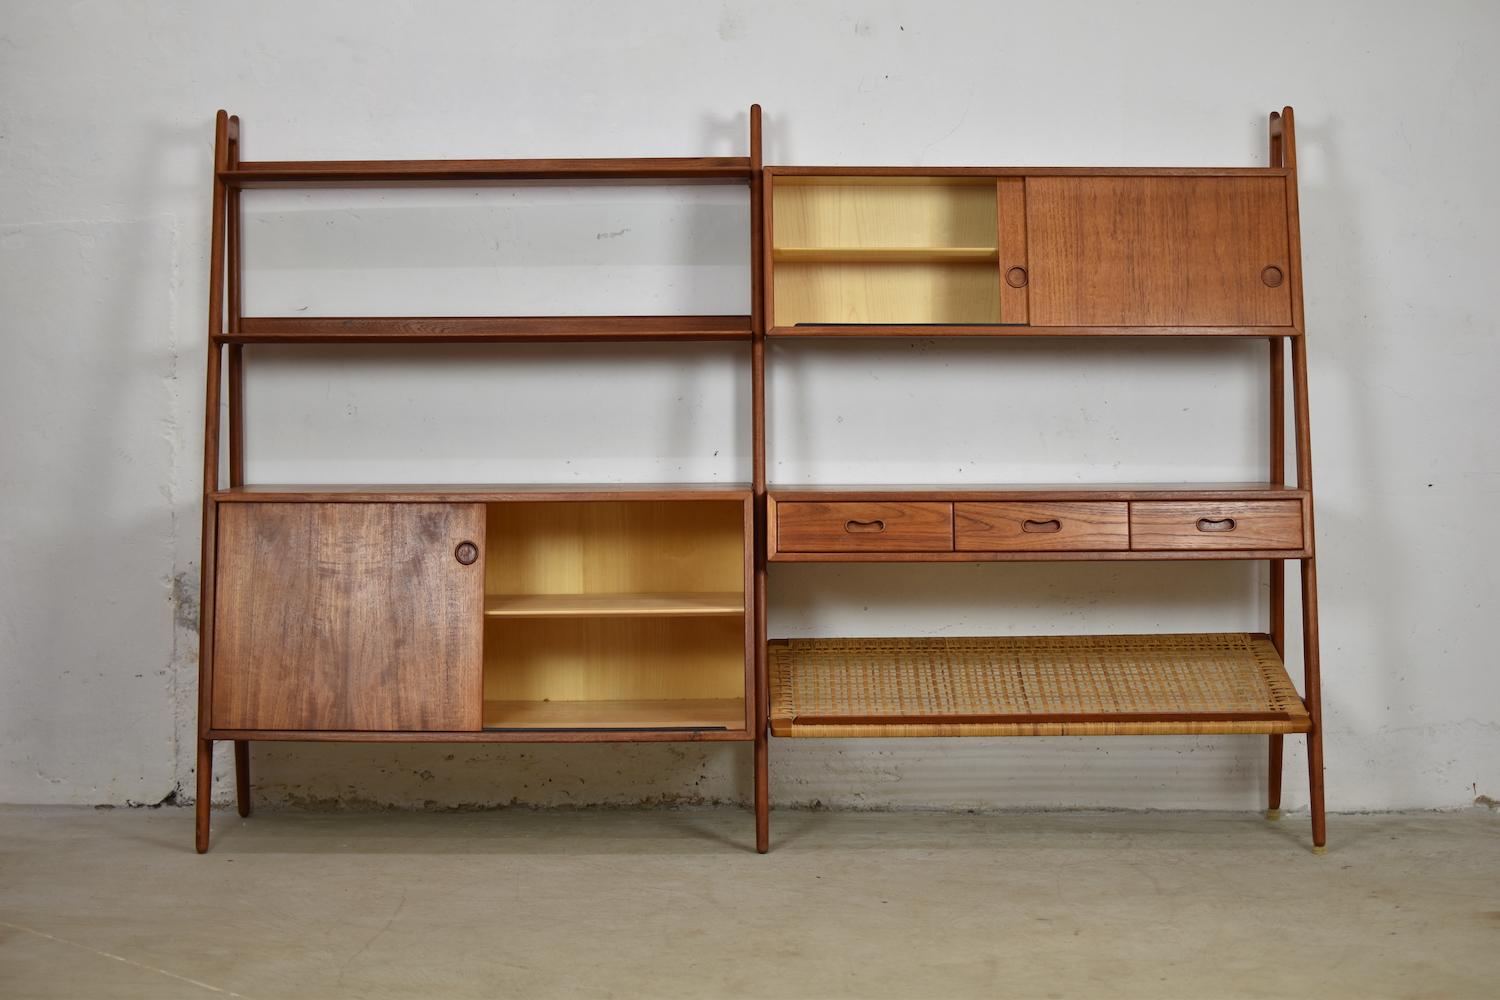 Proud to present you this rare freestanding bookshelf designed by Arne Vodder & Anton Borg for Vamo, Denmark, 1950s. This bookcase features several shelves, cabinets and a rattan magazine holder, all in teak. Freestanding because of the finished